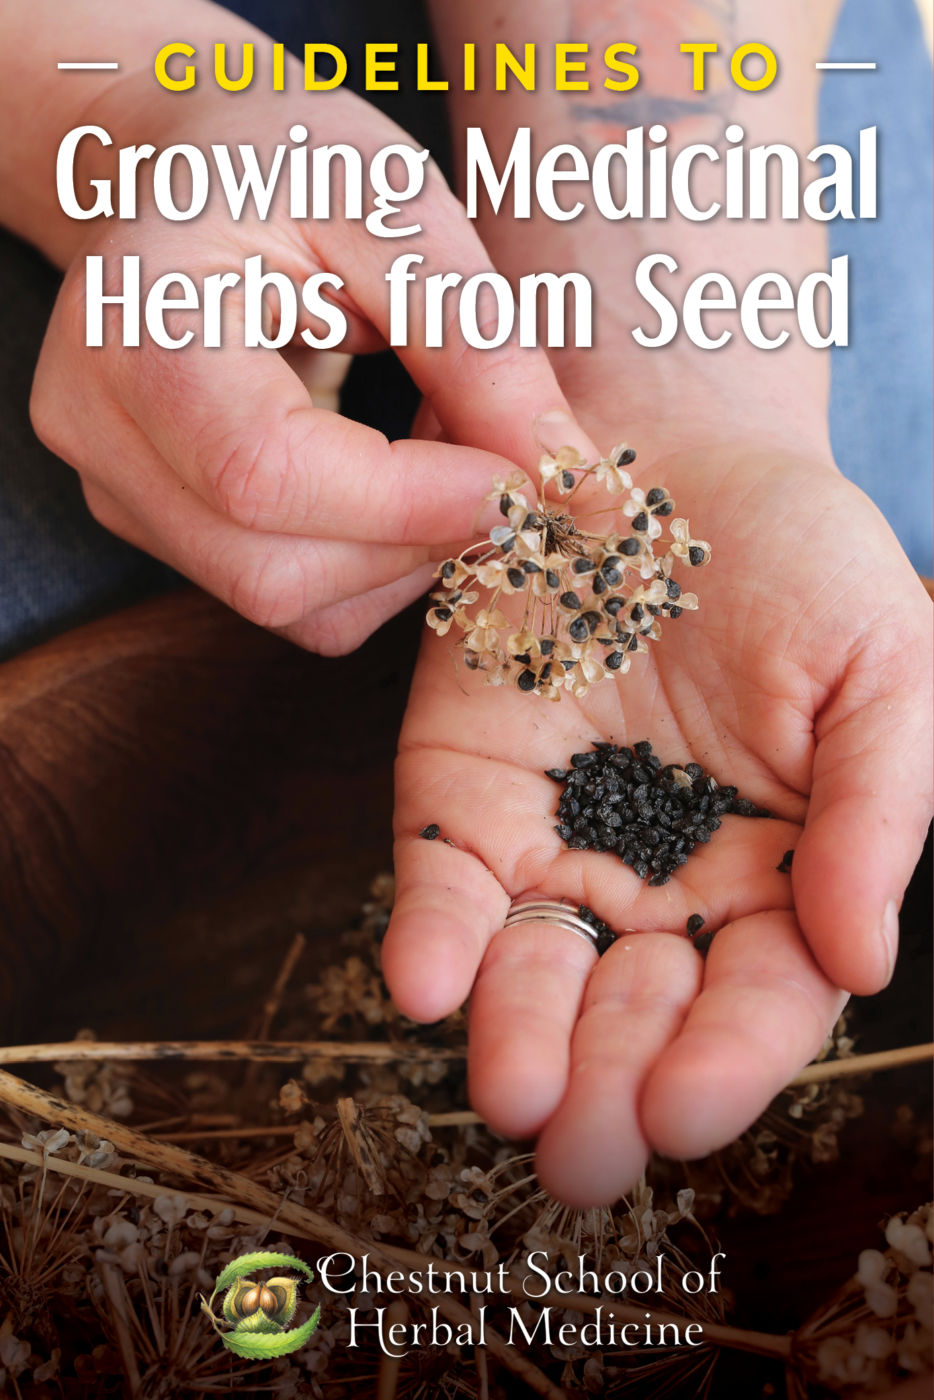 Growing Medicinal Herbs from Seed